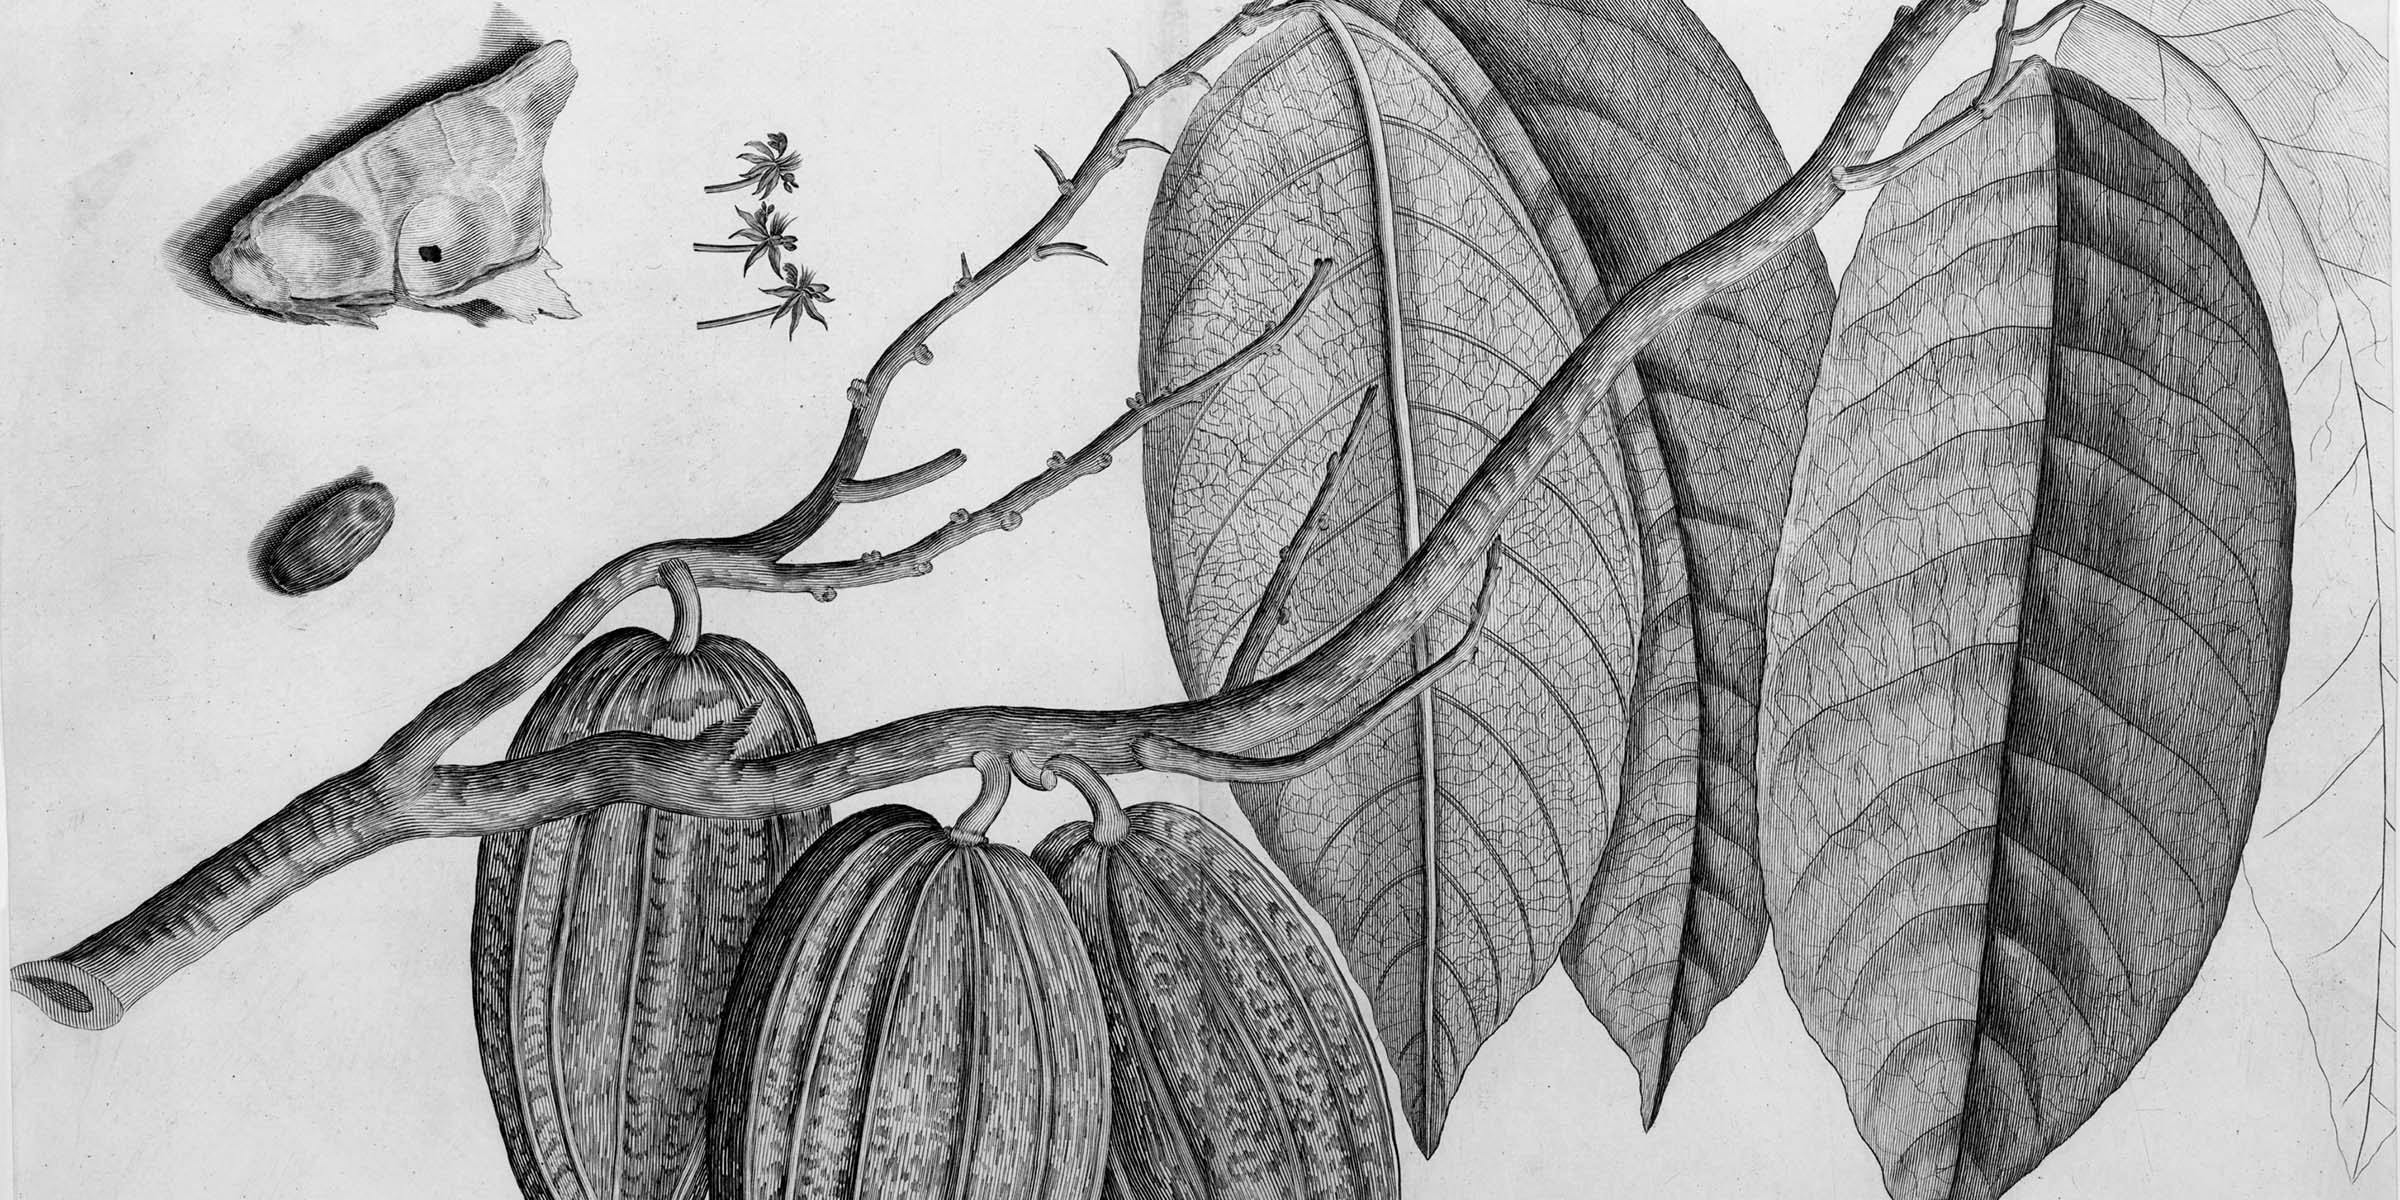 Black and white illustration of a branch with leaves and large football-shaped pods